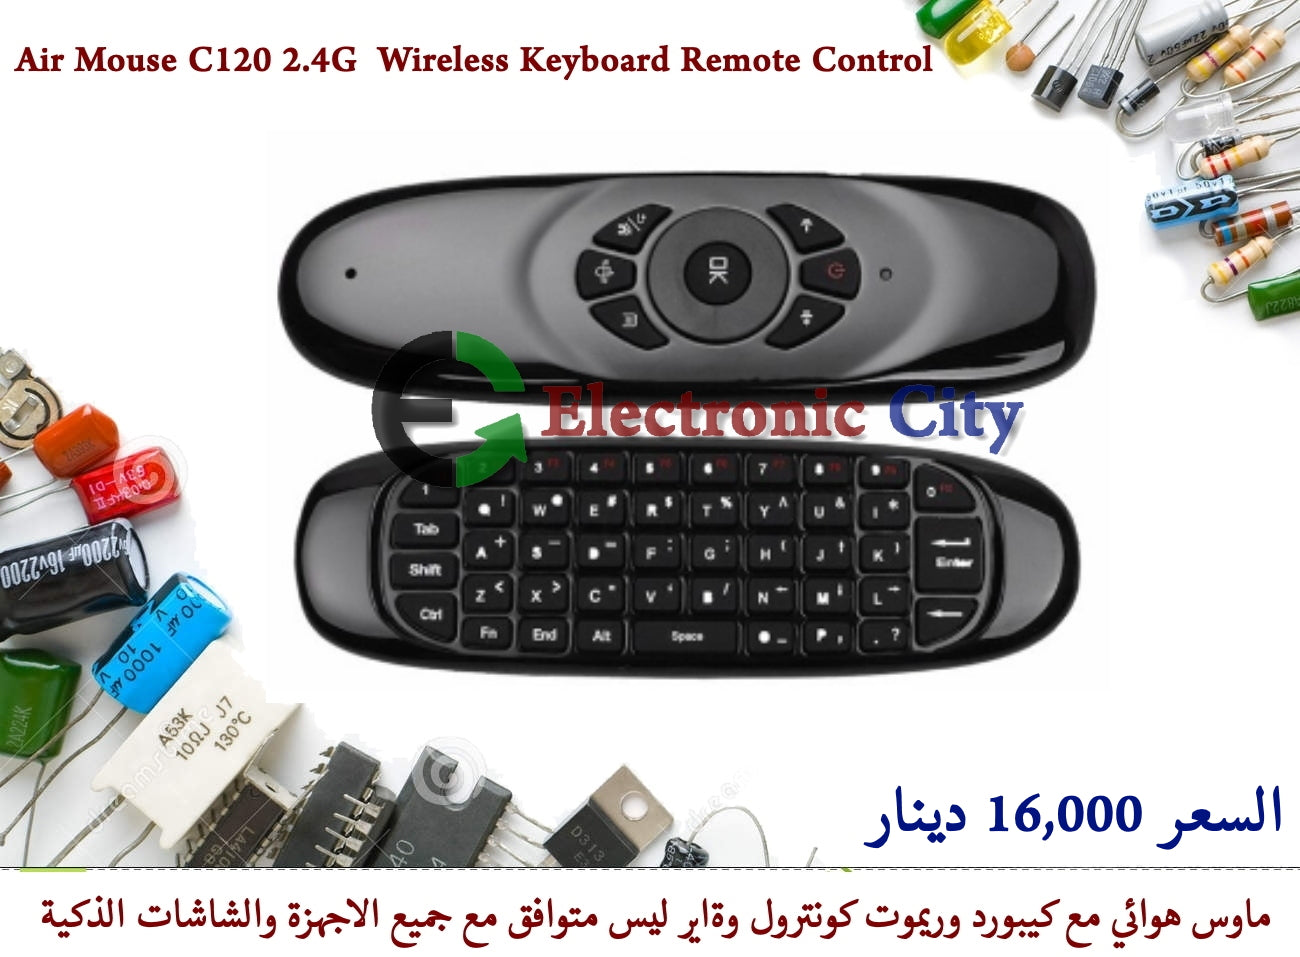 Air Mouse C120 2.4G  Wireless Keyboard Remote Control